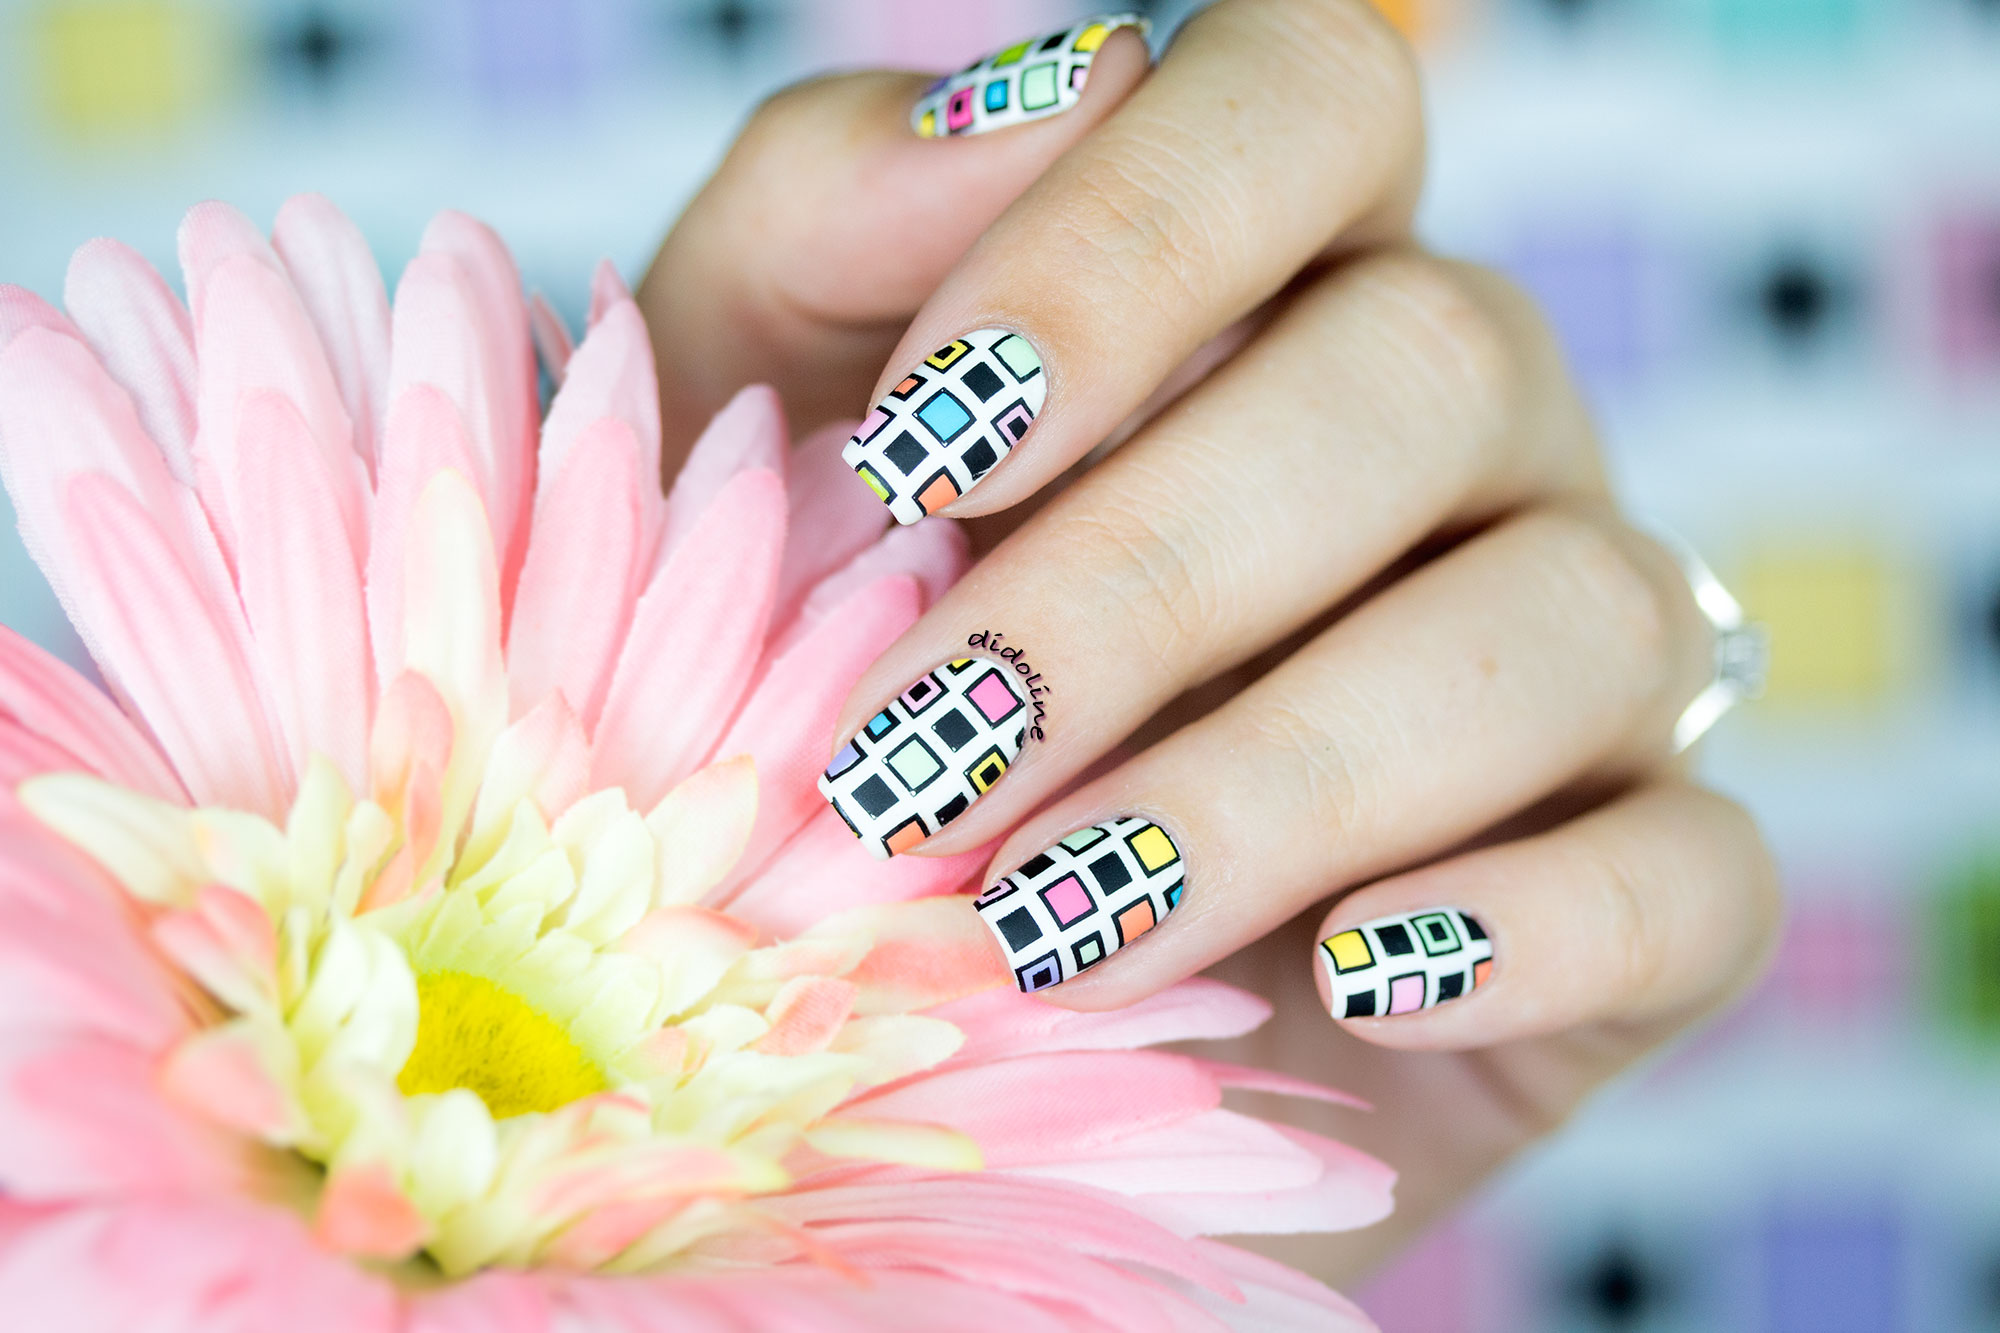 4. Advanced Nail Art Designs for Short Nails - wide 6